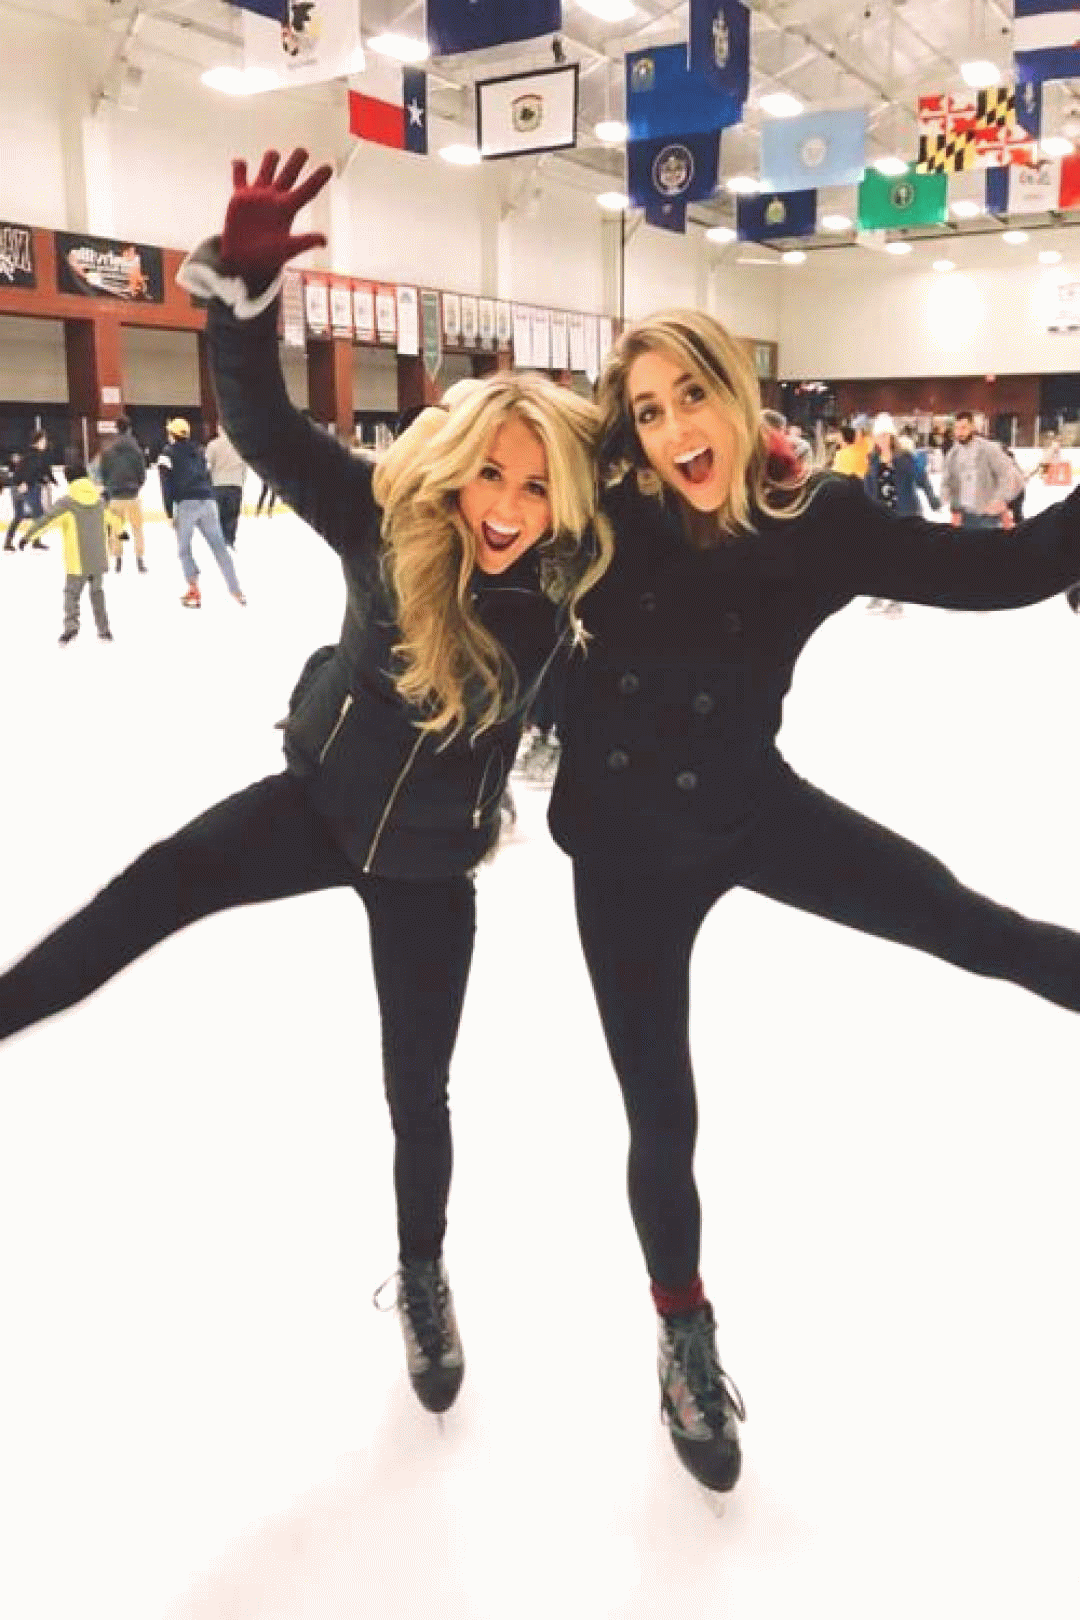 bff pictures squad ice skating cute instagram pics bilder eislauf outfits pair